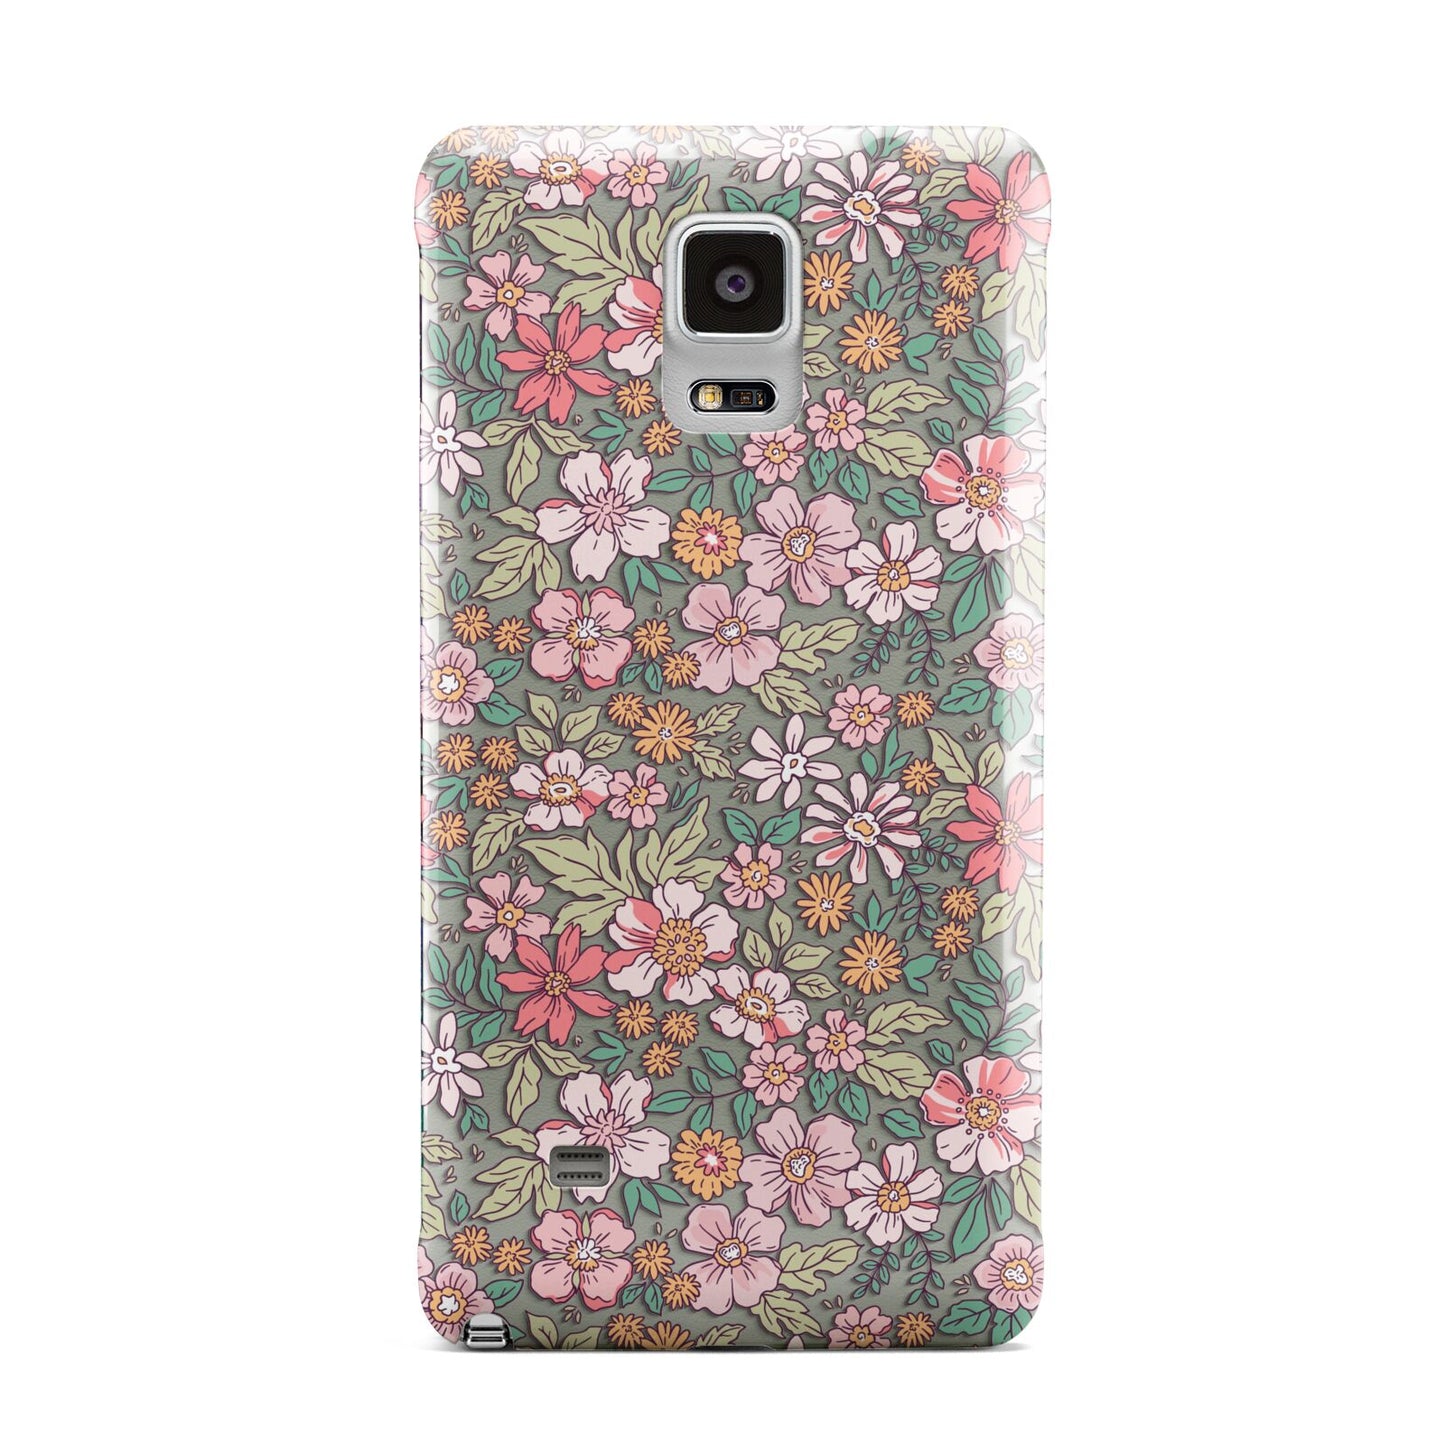 Small Floral Pattern Samsung Galaxy Note 4 Case